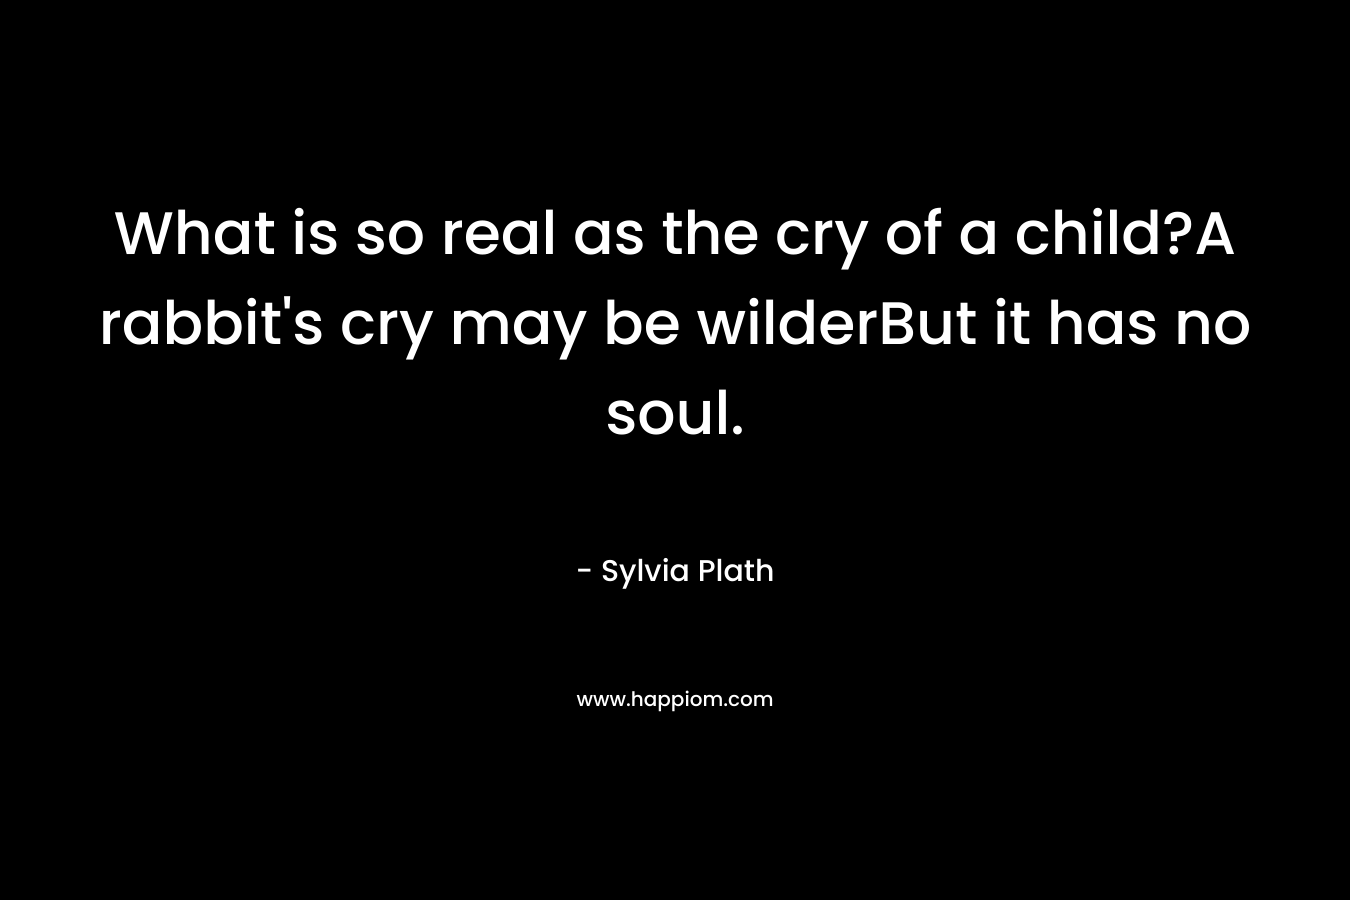 What is so real as the cry of a child?A rabbit's cry may be wilderBut it has no soul.